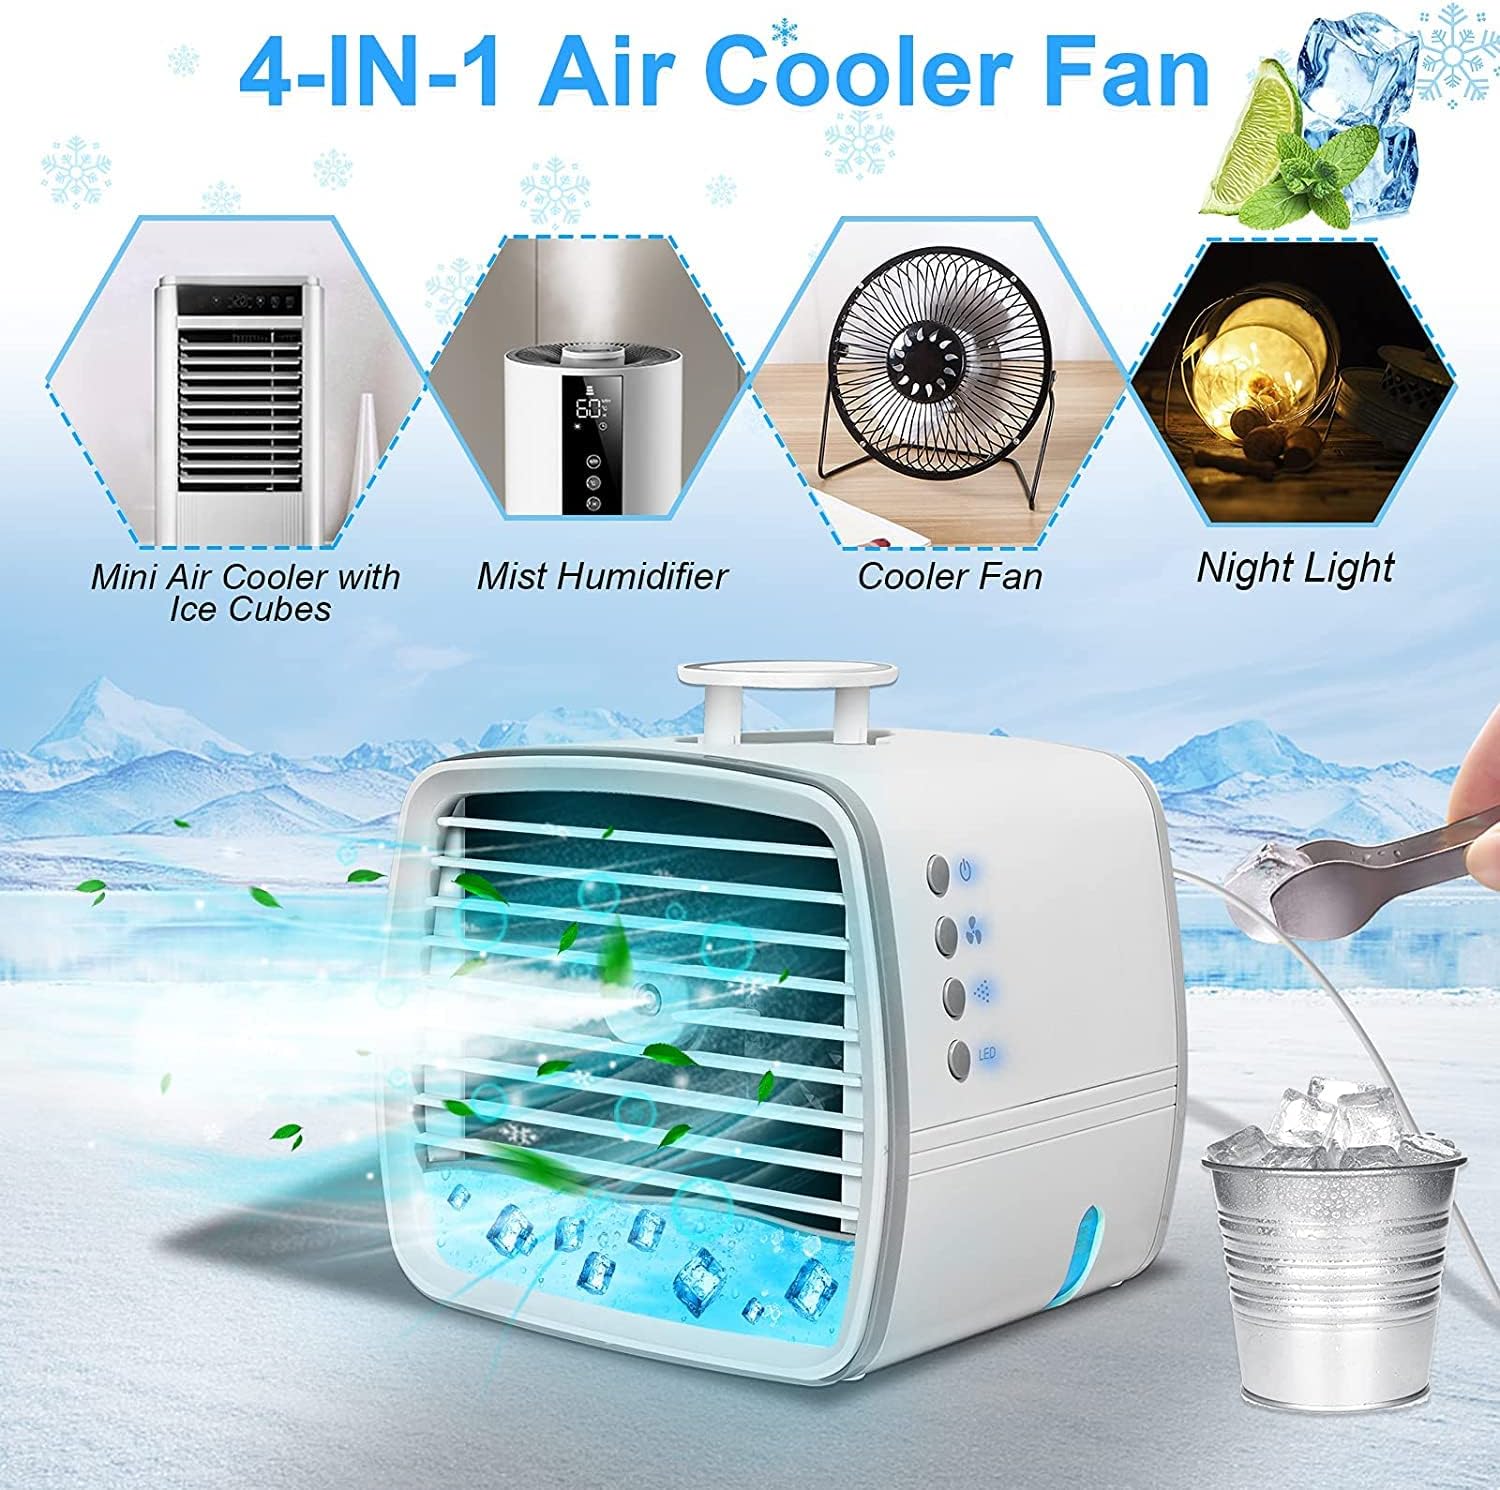 Generic Portable Air Conditioner, Personal Mini Air Cooler Fan, Personal Portable AC Air Conditioner for Office Desk Camping Bedroom Ro